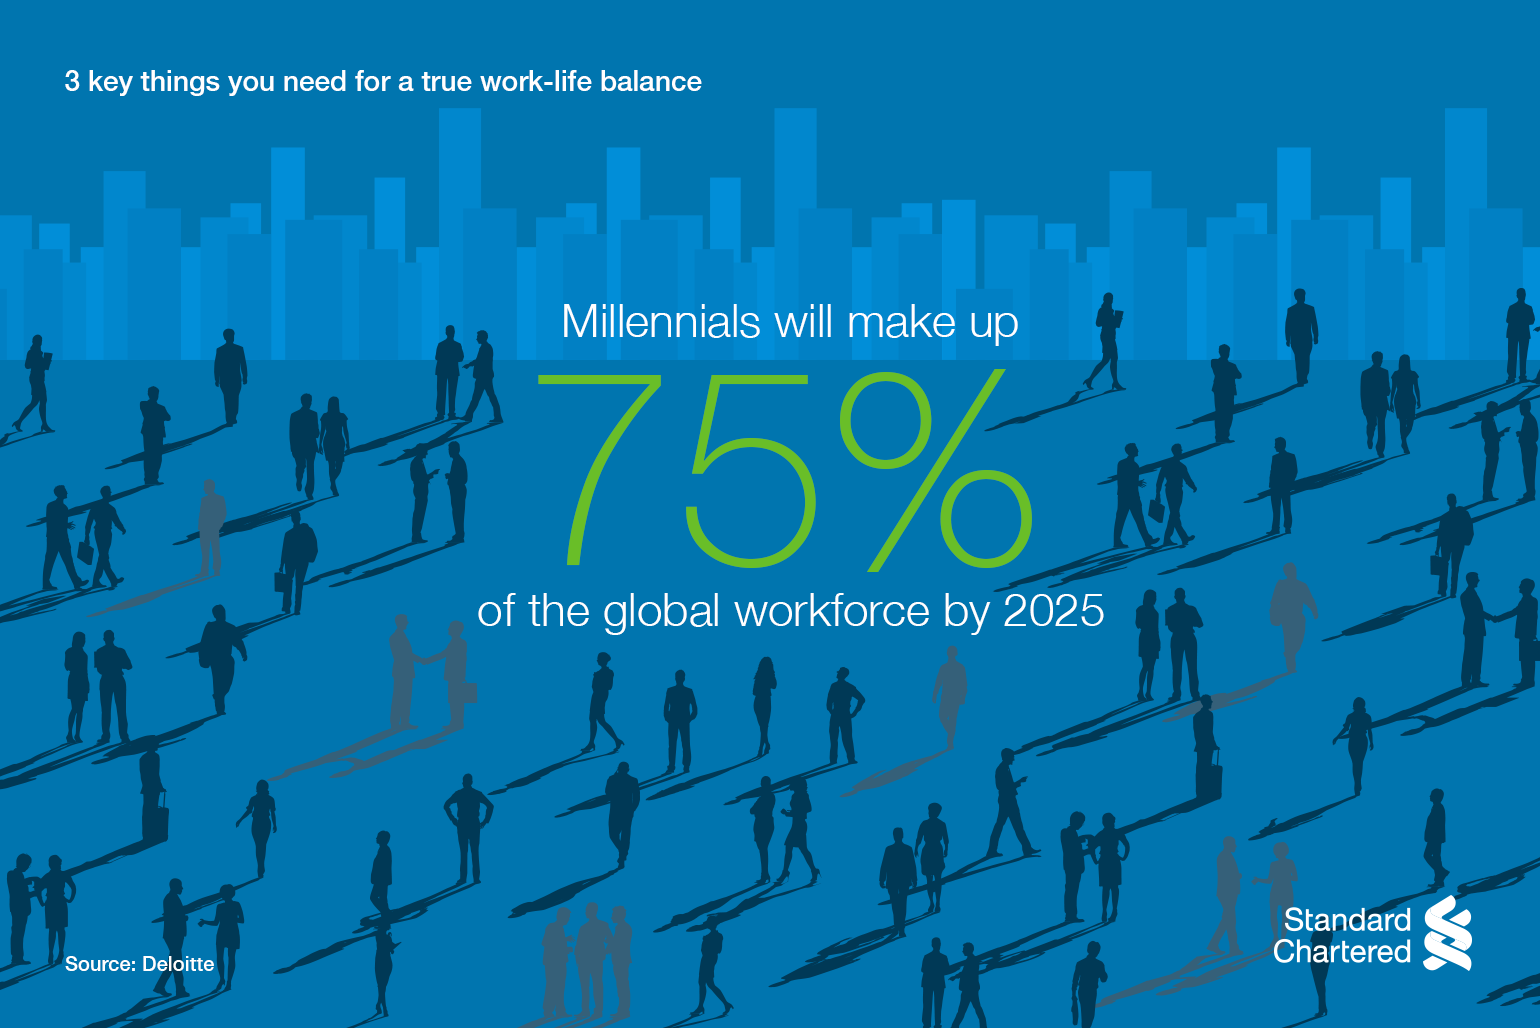 Millennials will make up 75% of the global workforce by 2025